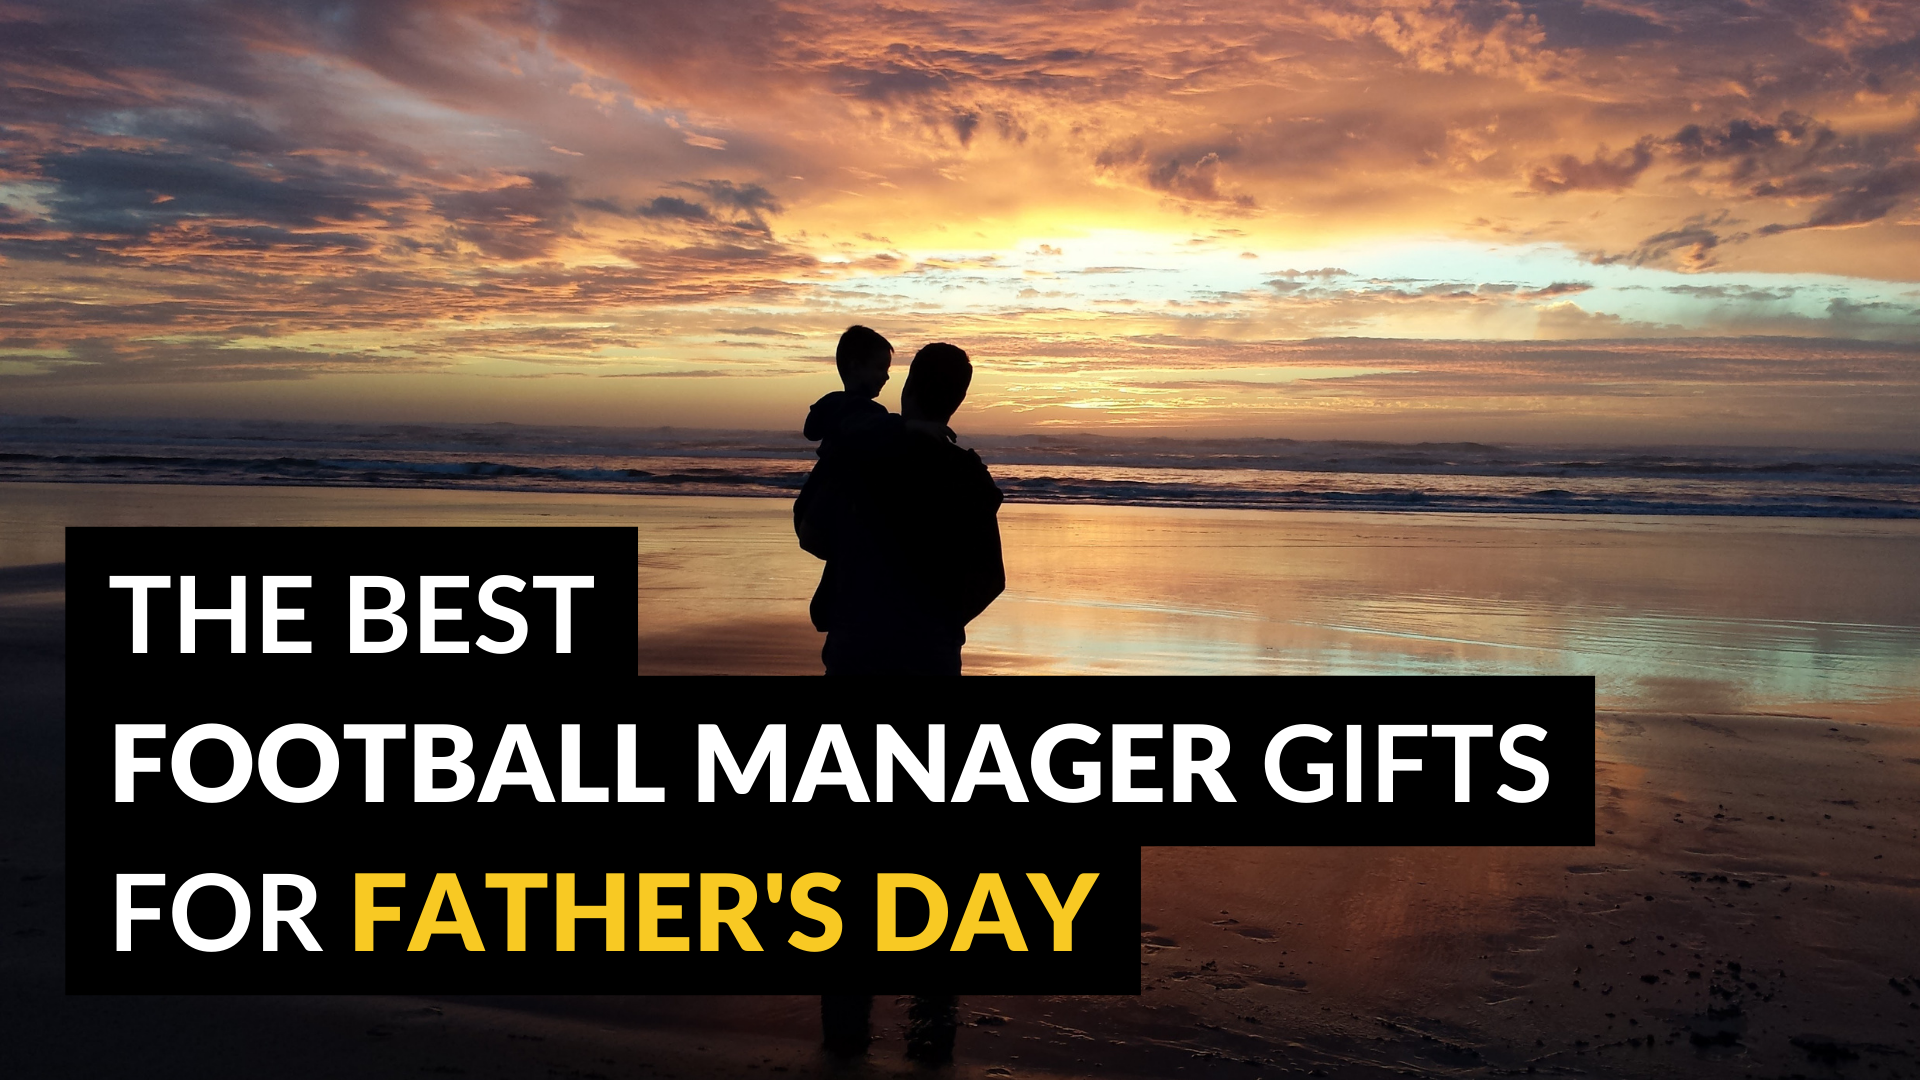 Football Manager Gift Ideas for Father's Day